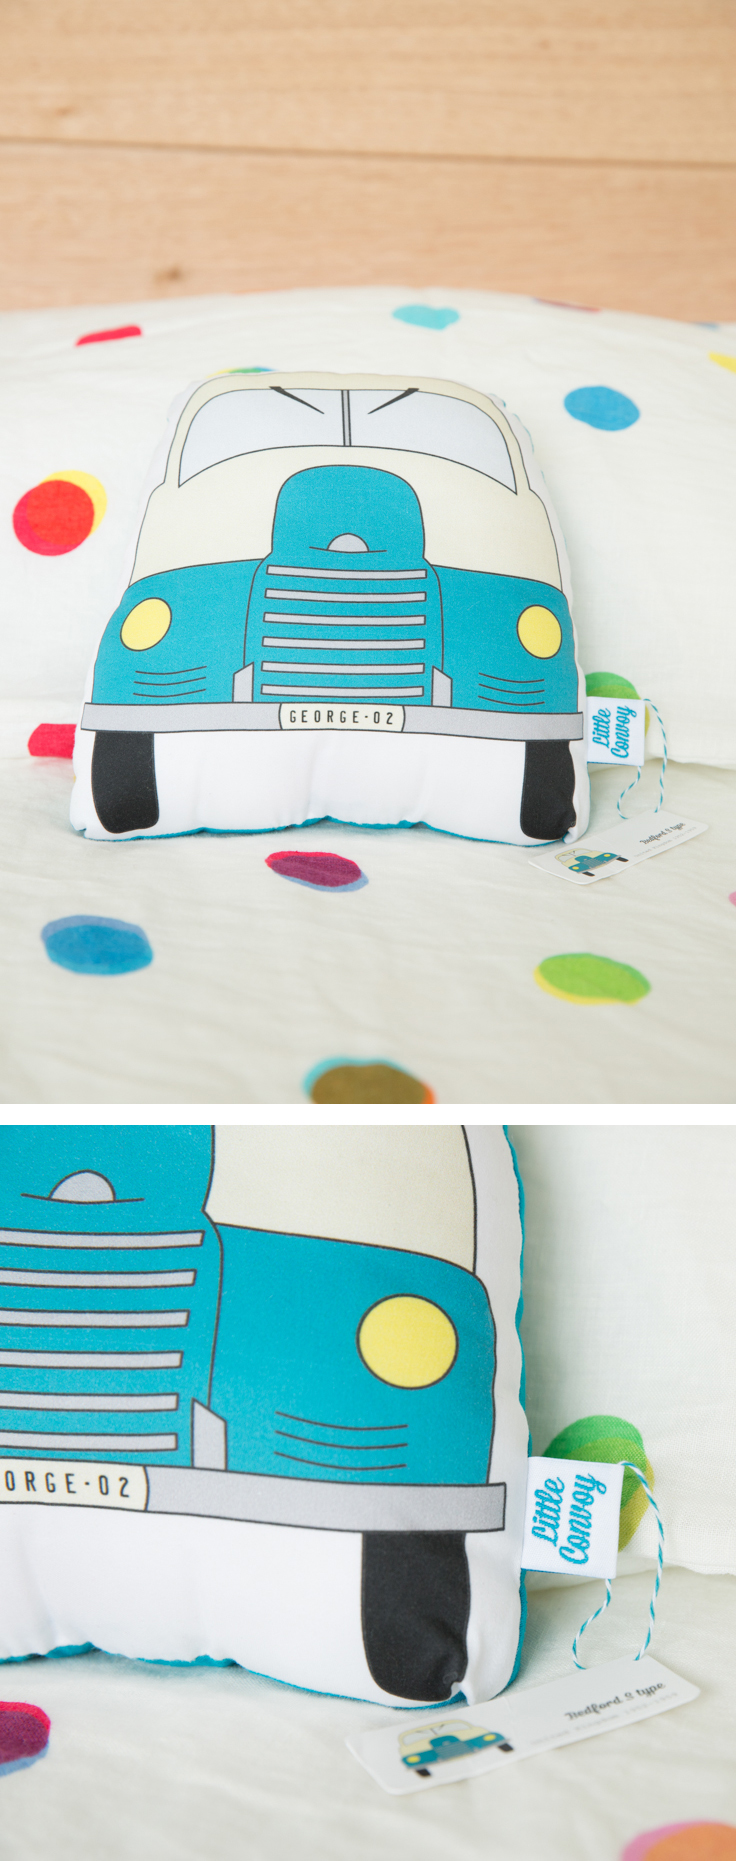 Kitty of Little Convoy makes cuddly truck soft toy pillows from drawings of her favourite vintage trucks. The trucks are first hand drawn, and then digitally drawn and coloured. They are printed on certified organic cotton, with organic cotton backing and filled with stuffing. Each truck is handmade. Great presents for newborn baby, little boy, or little girl!